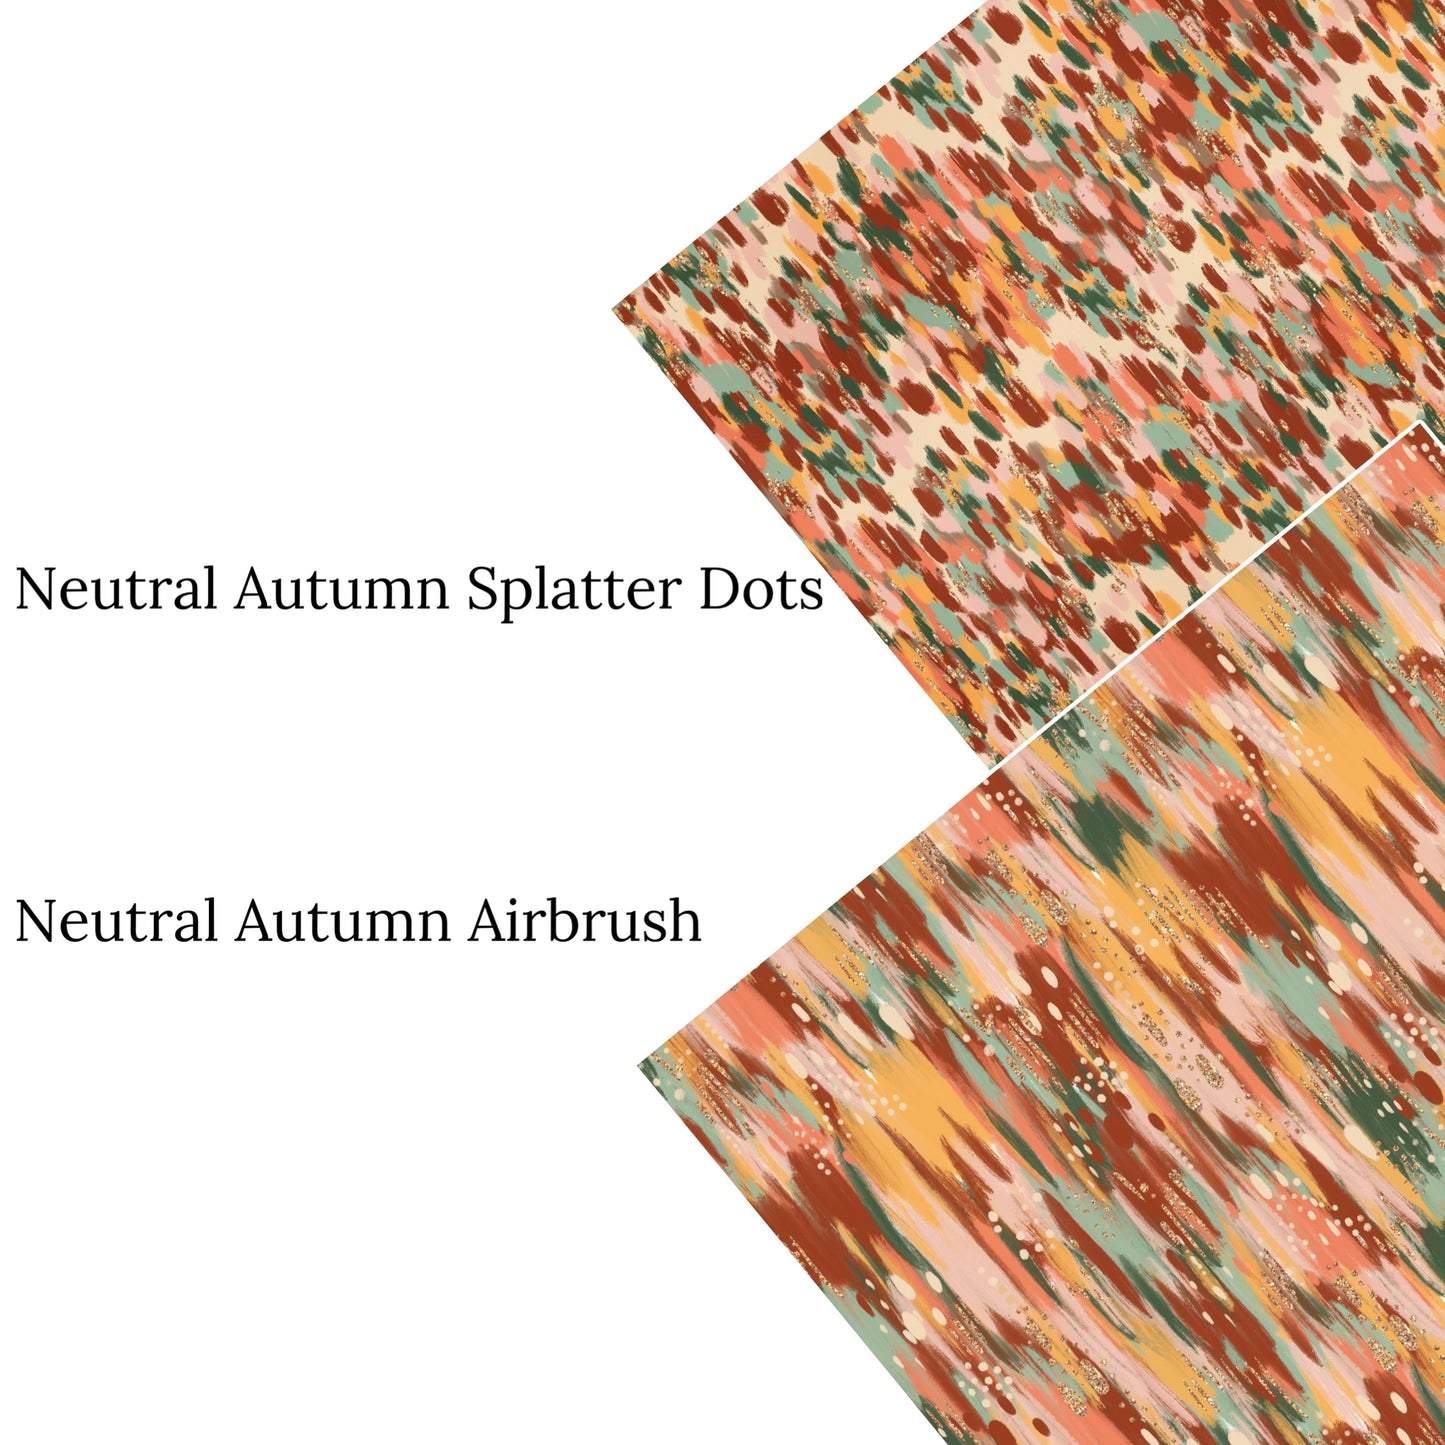 Neutral Autumn Airbrush Faux Leather Sheets